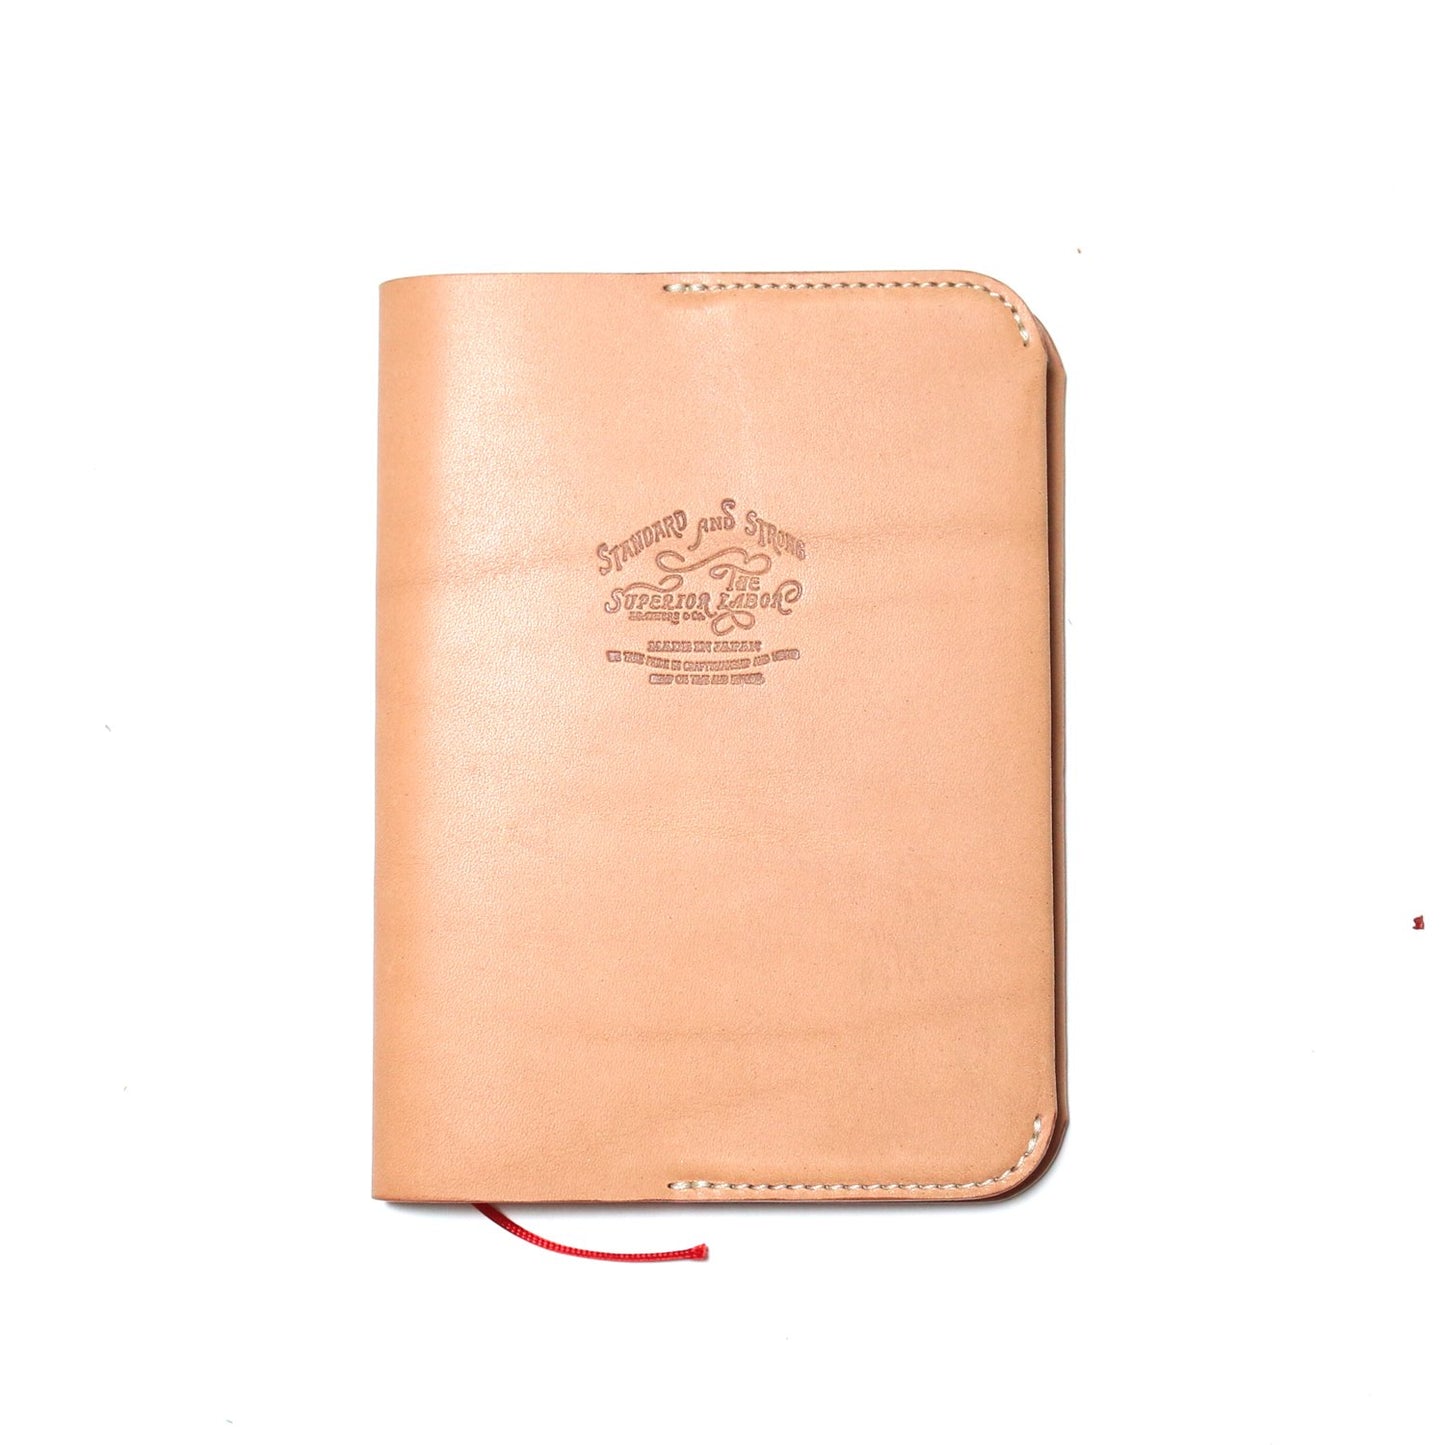 A6 TSL leather Notebook cover